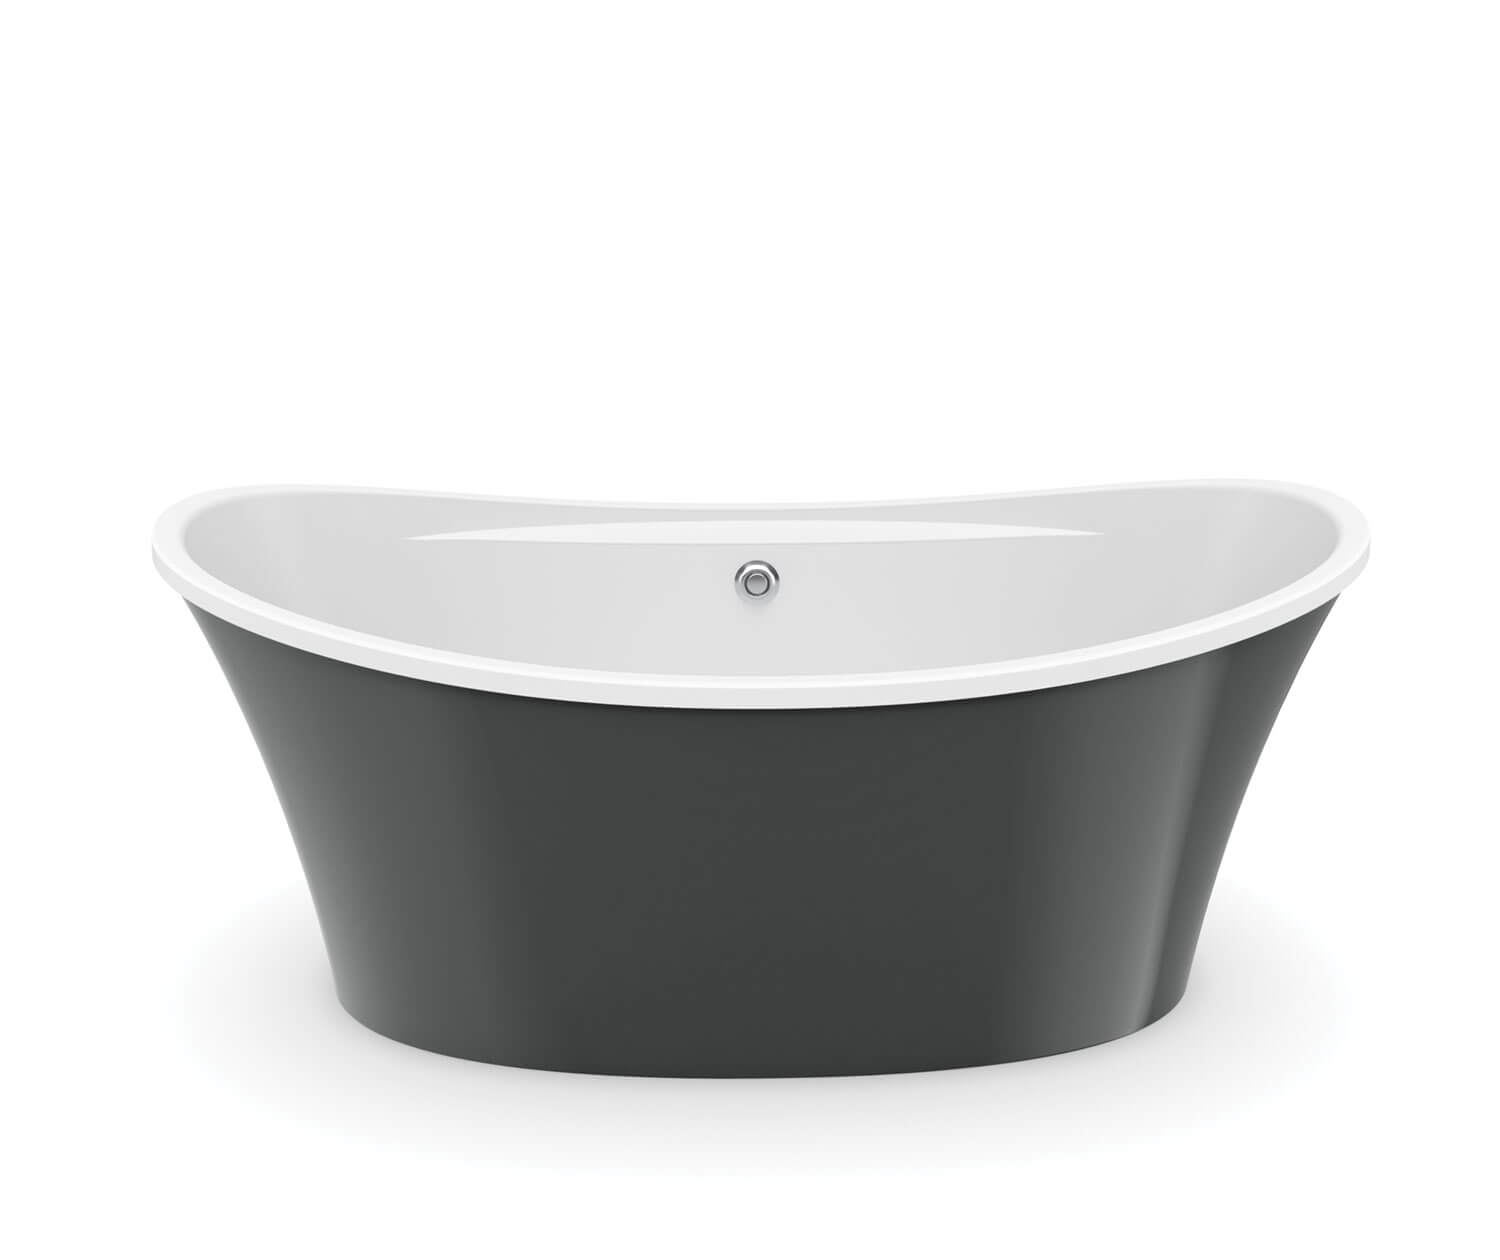 https://res.cloudinary.com/american-bath-group/image/upload/websites-product-info-and-content/maax/products/bathtubs/106267/images/maax-106267-019.jpg